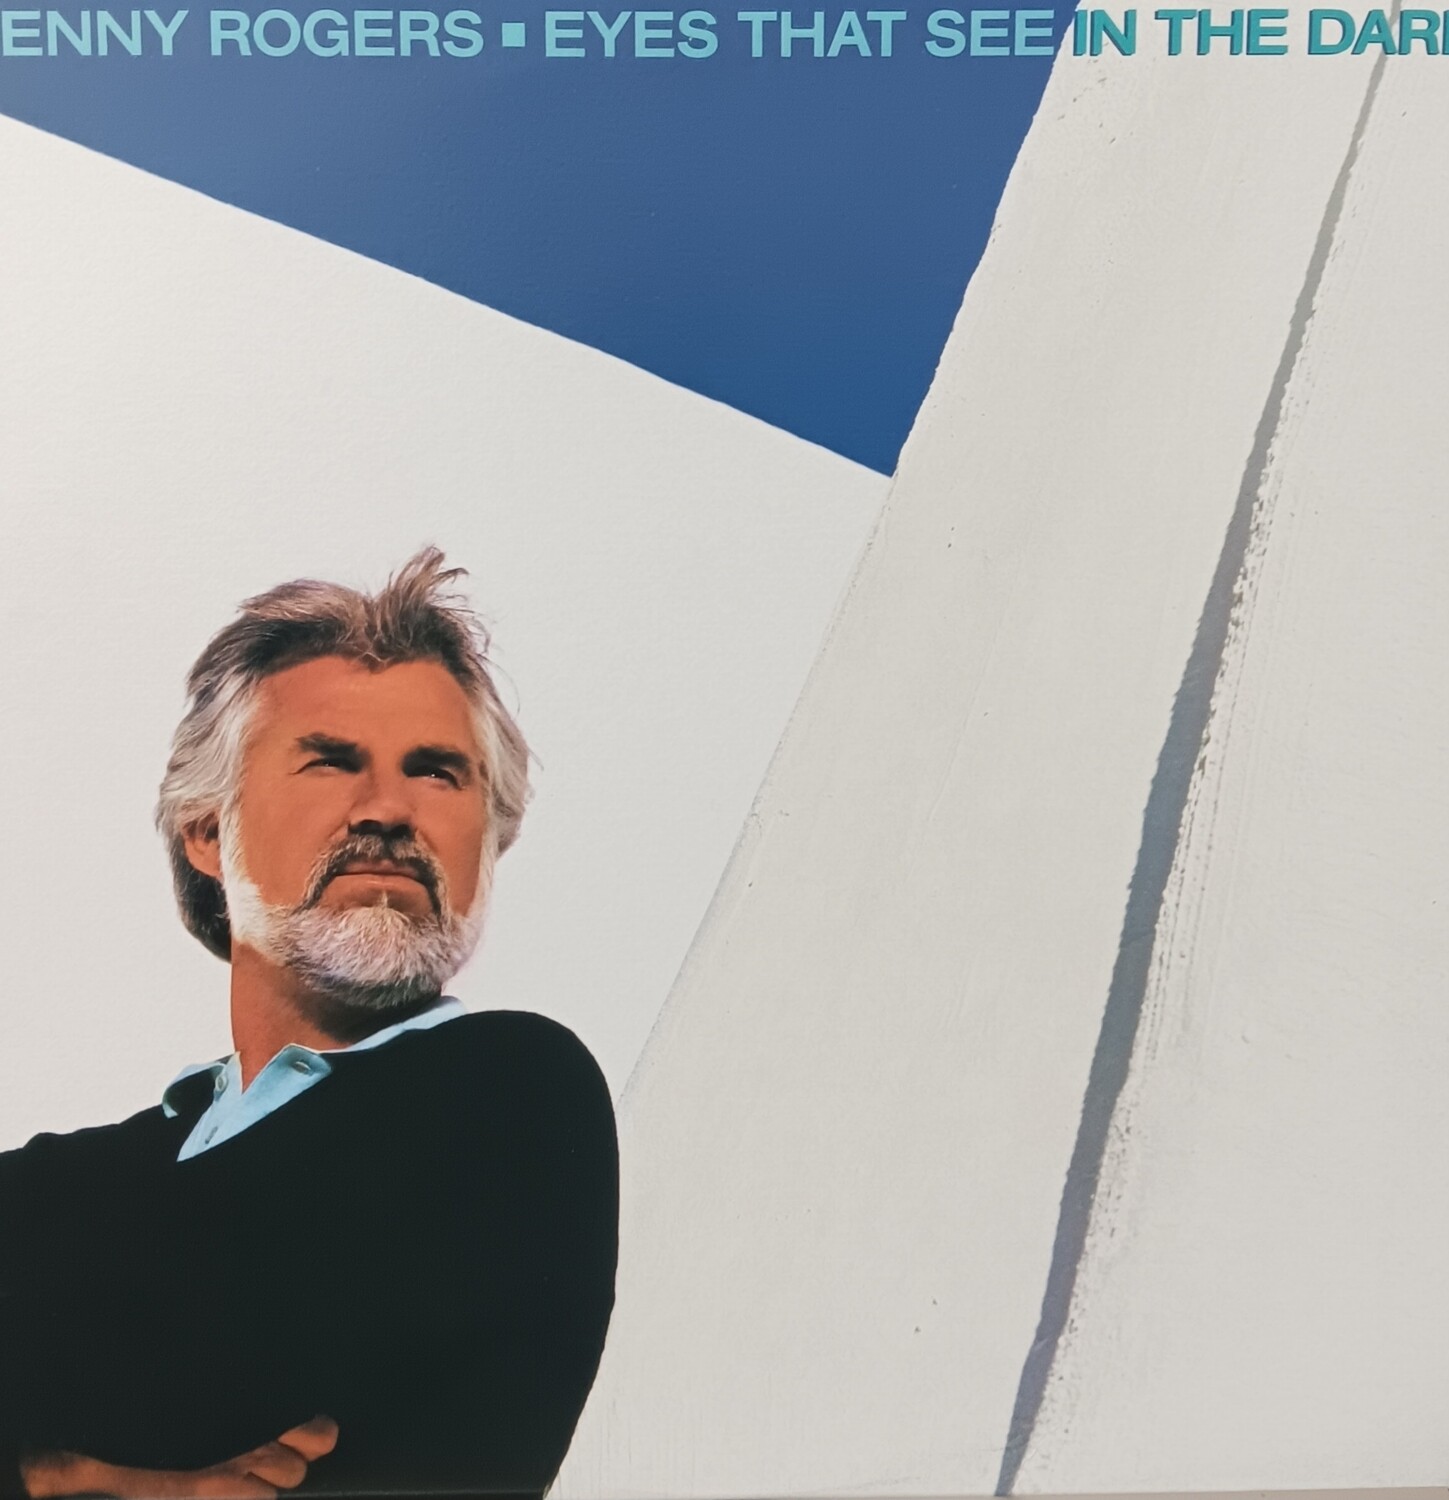 Kenny Rogers - EYE THAT SEE IN THE DARK